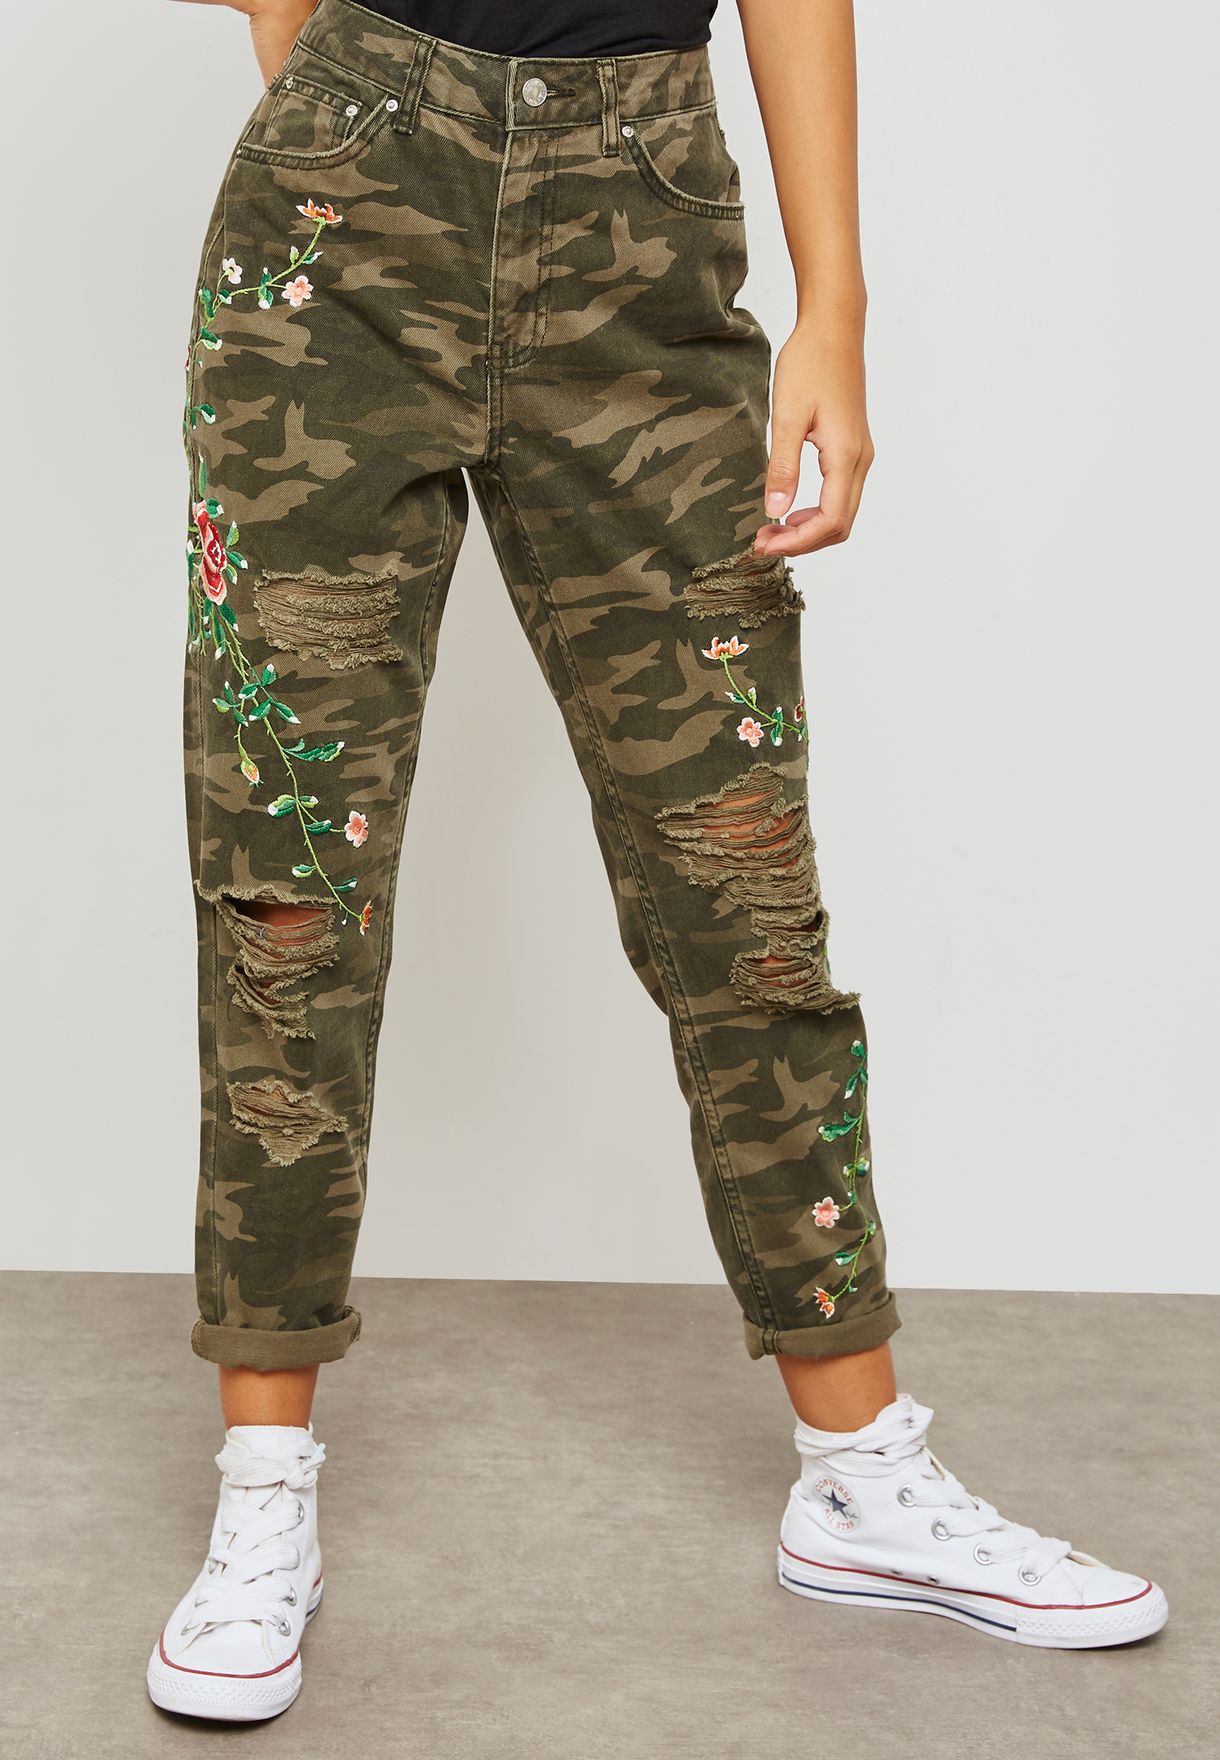 topshop camouflage jeans